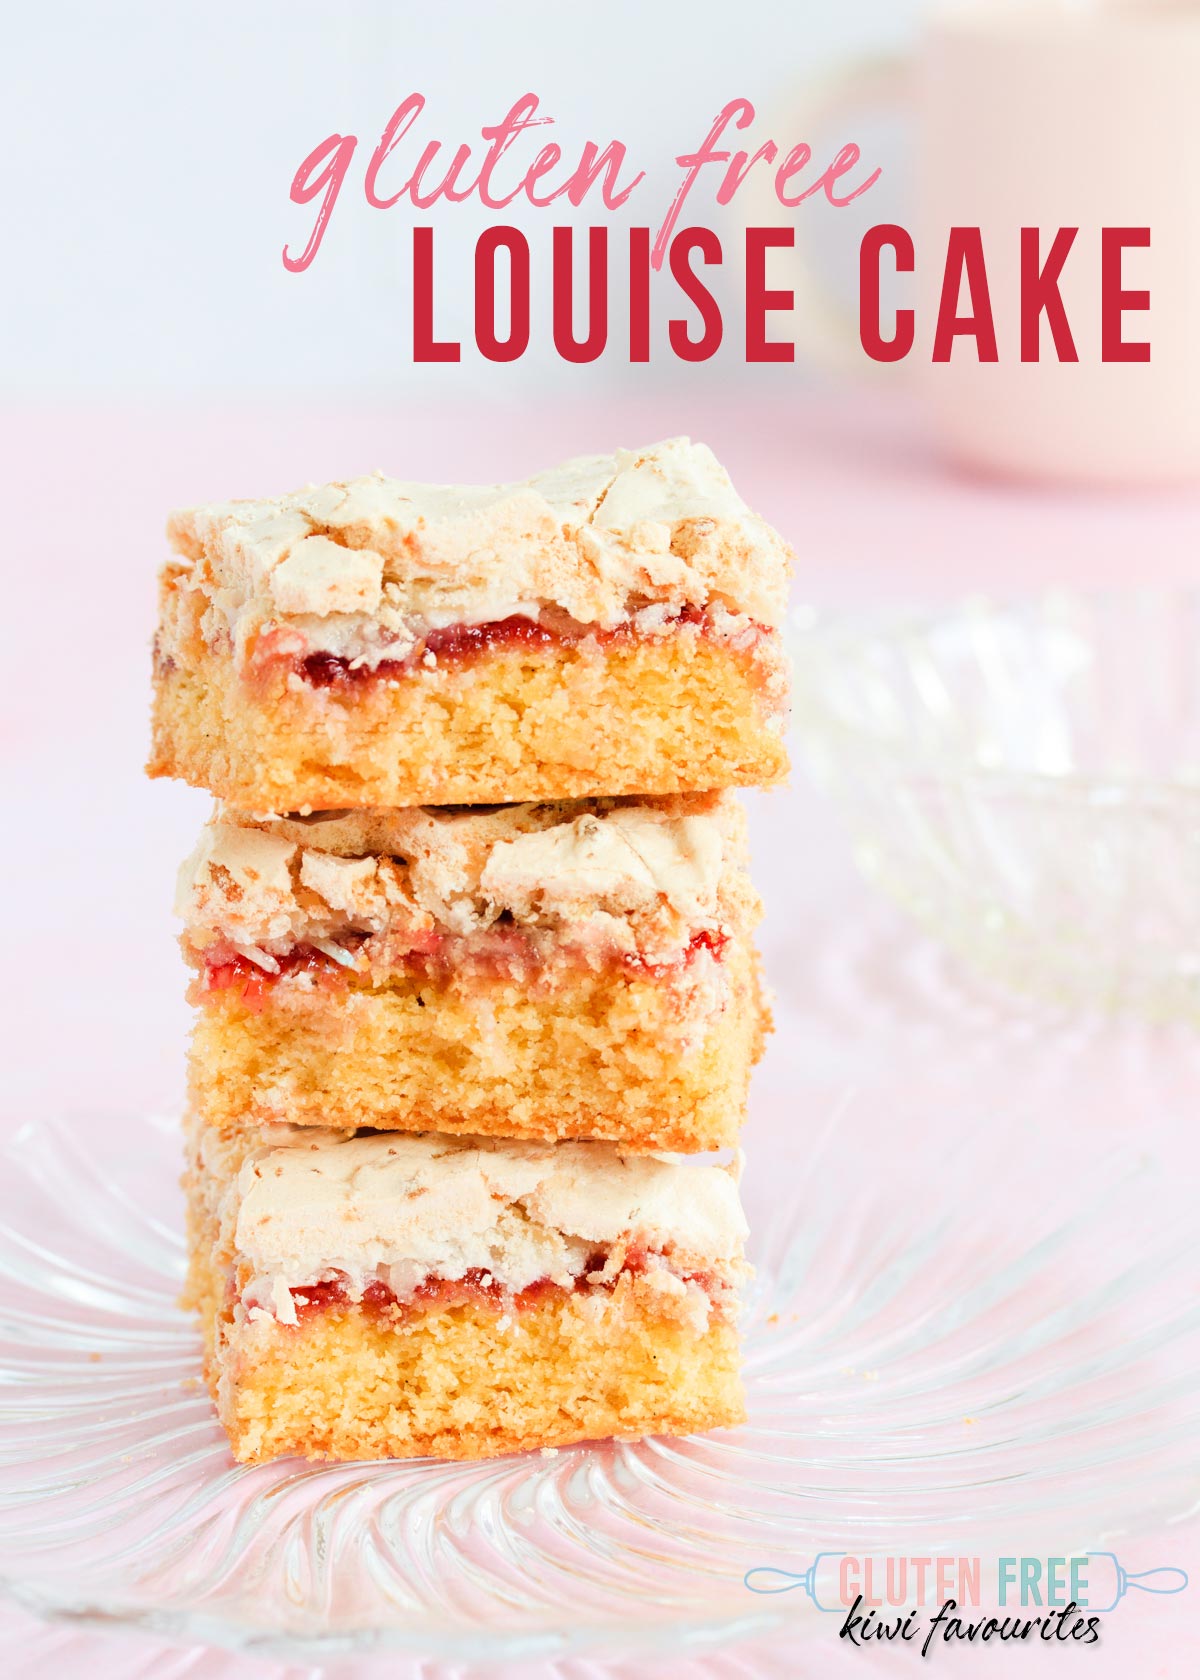 Three square pieces of louise cake stacked on a glass plate, text overlay reads "gluten free Louise cake".